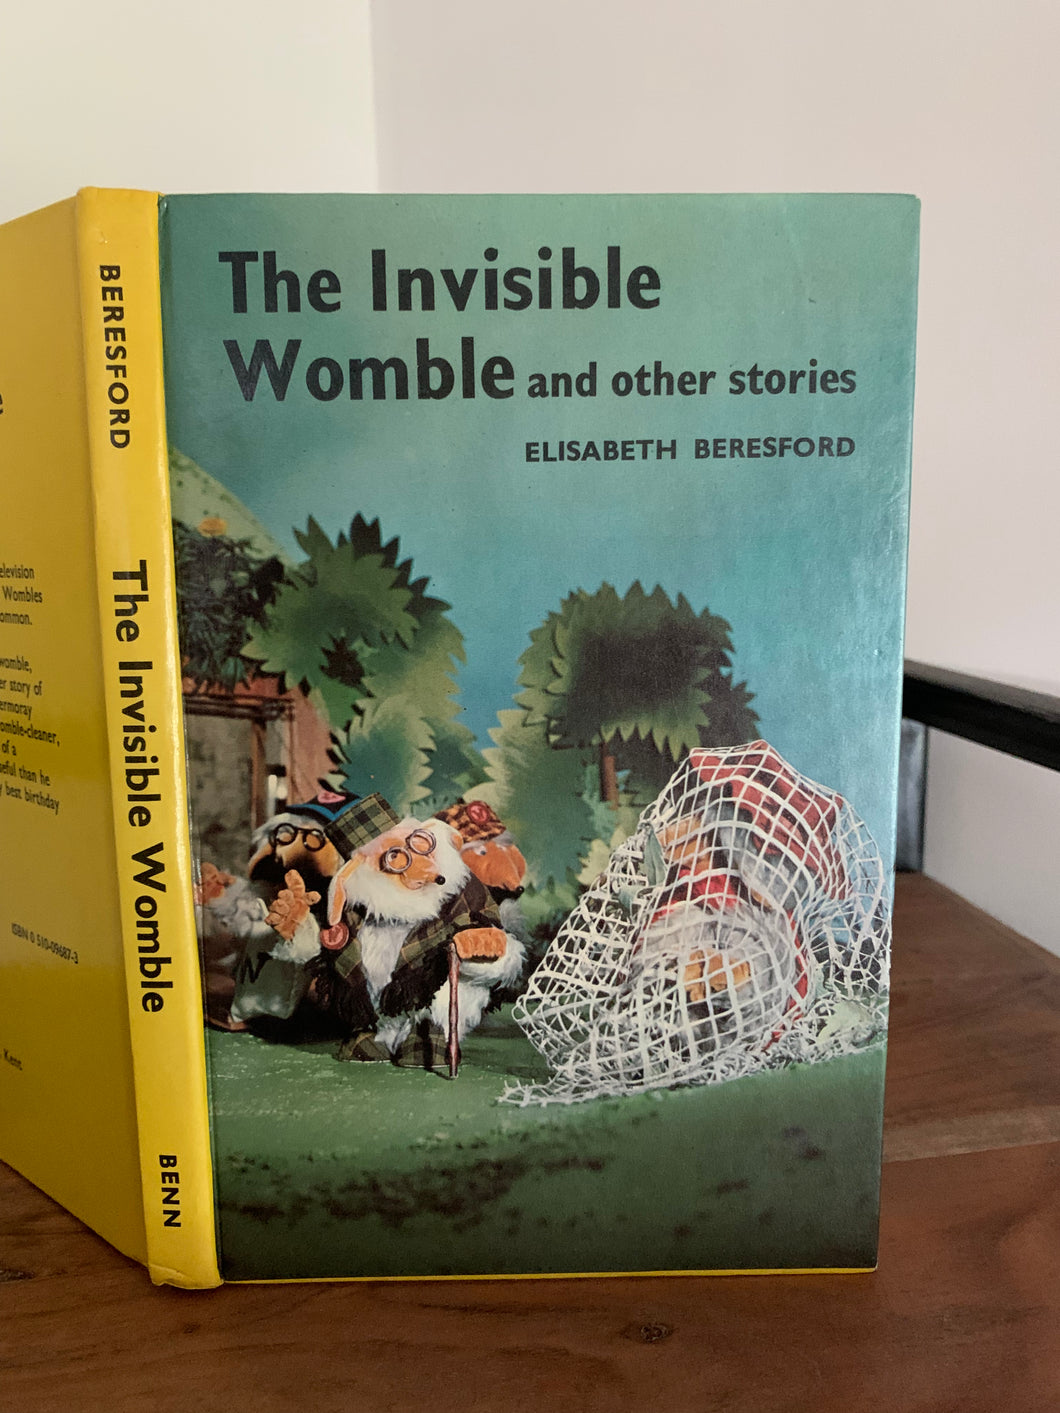 The Invisible Womble and other stories